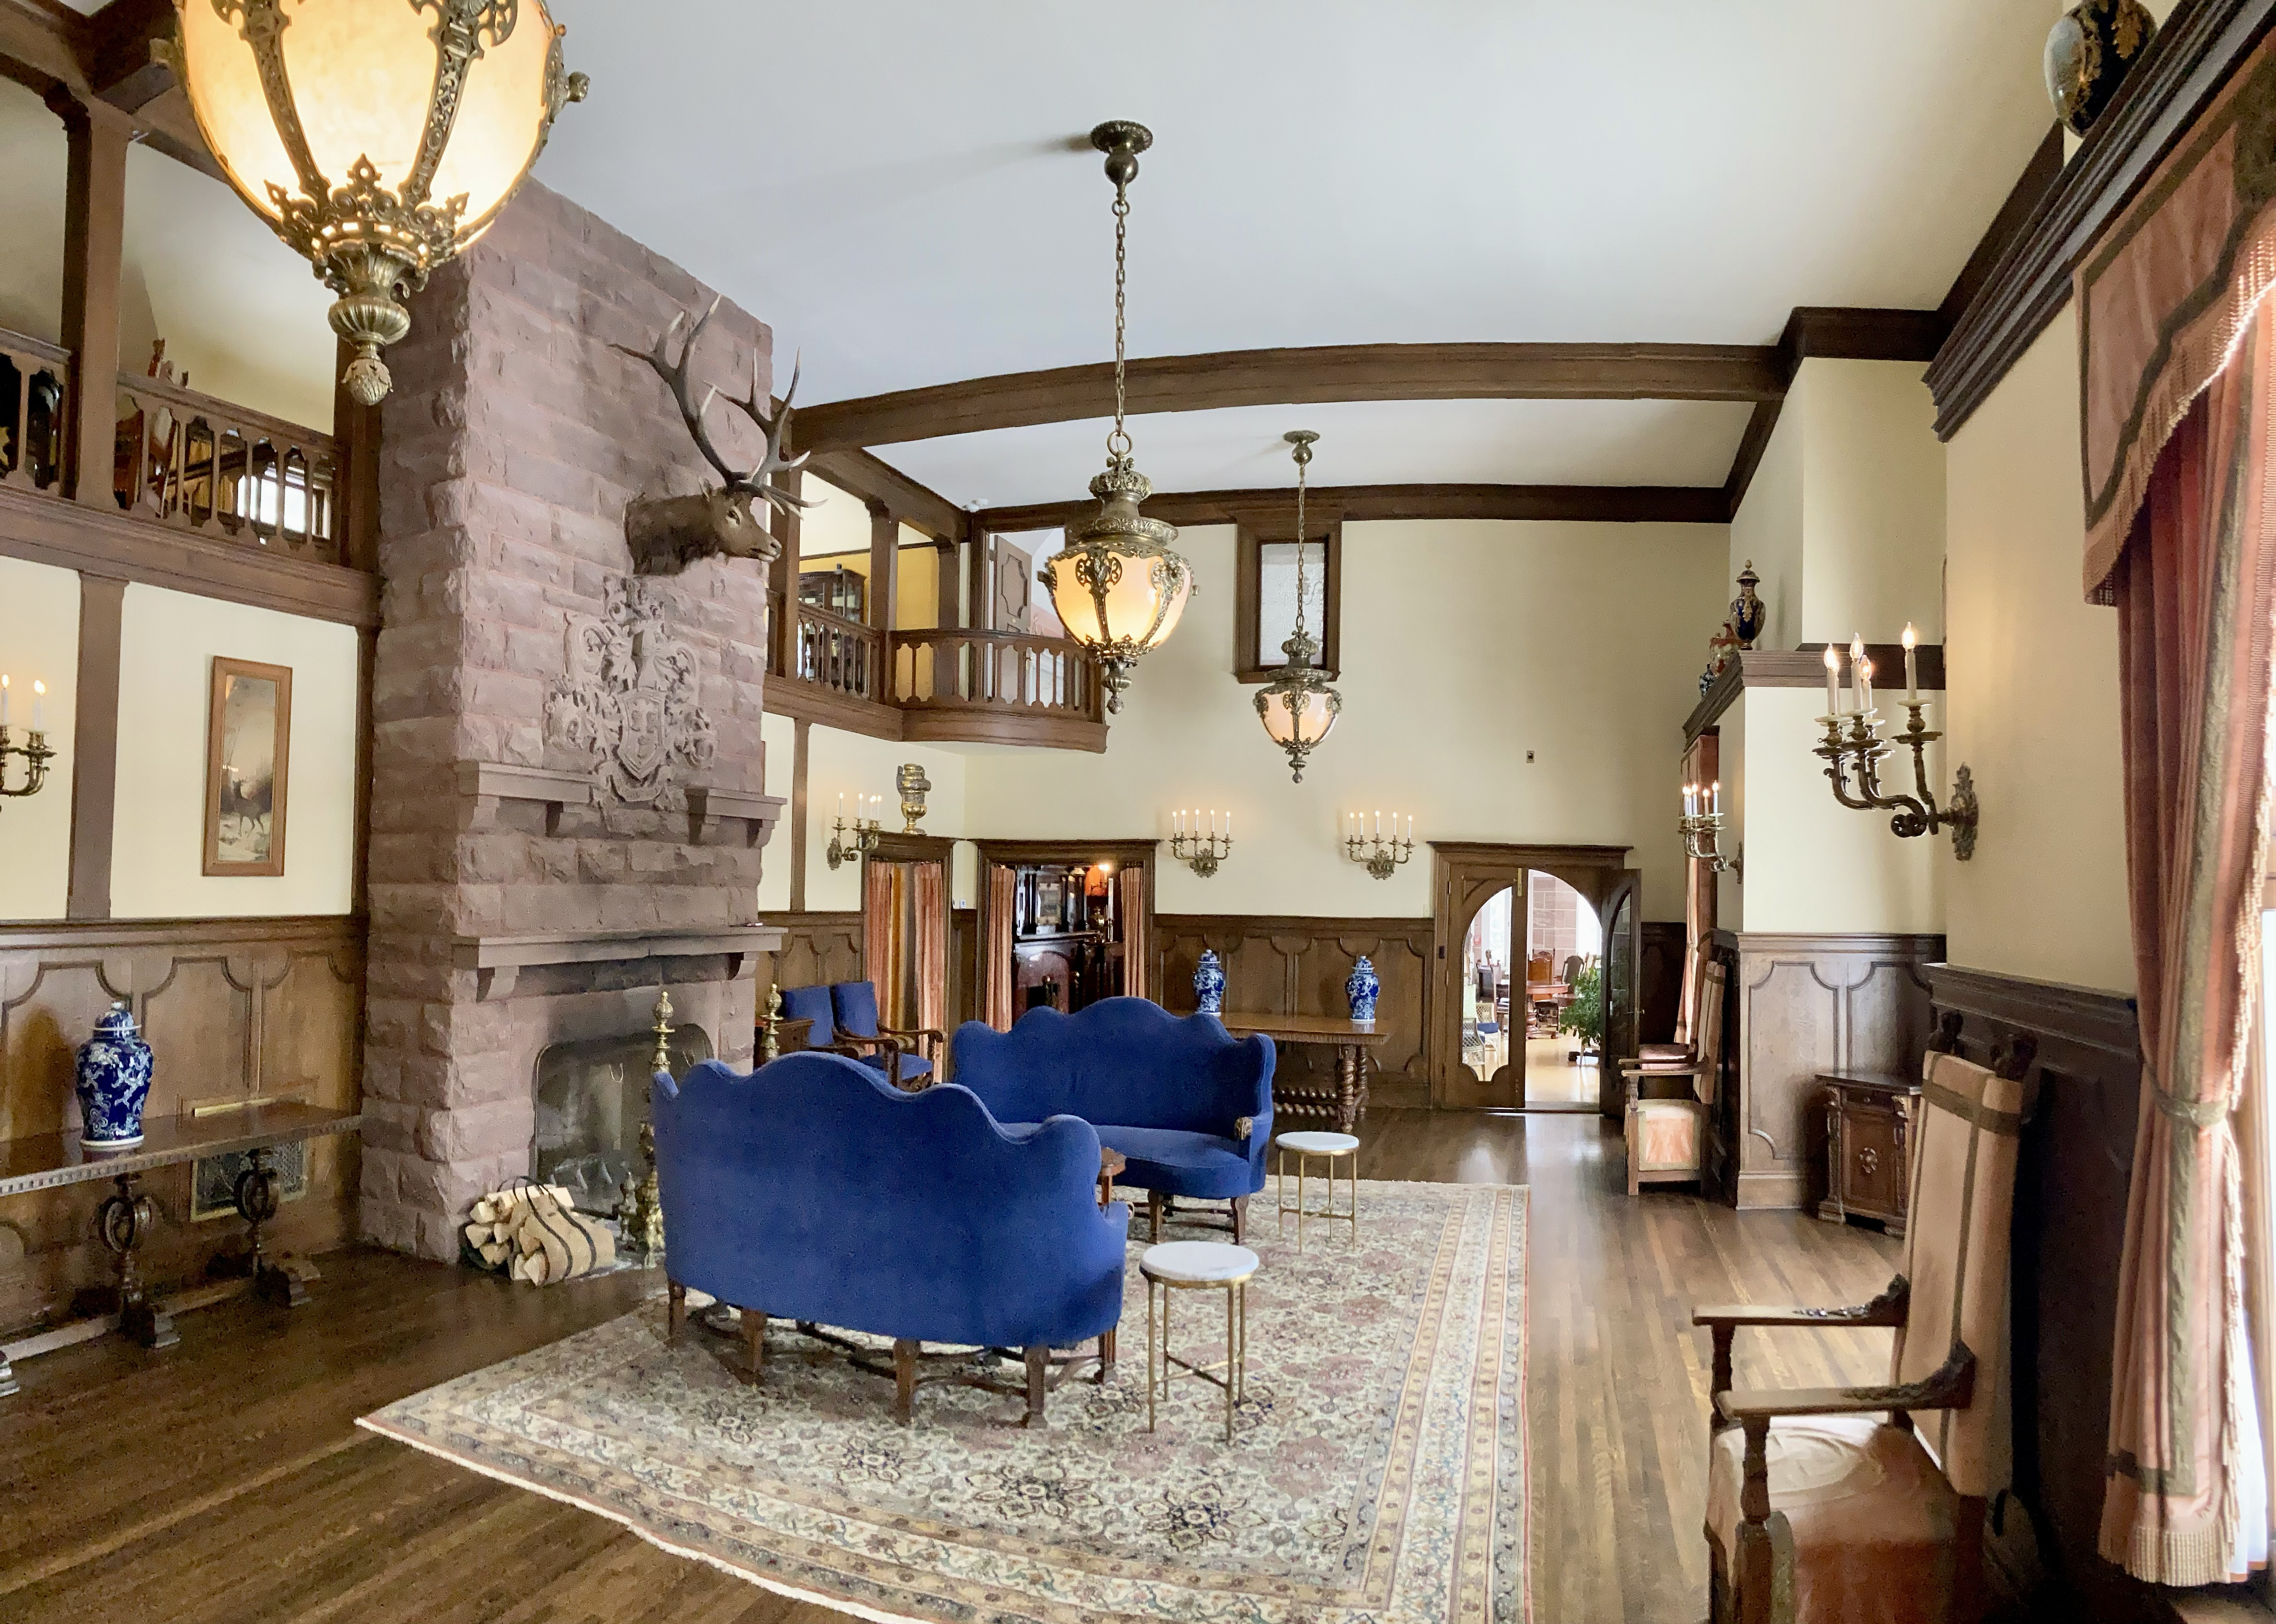 An opulent sitting room with wooden floors, rug, colorful turn-of-the-century furniture, and a stone fireplace.